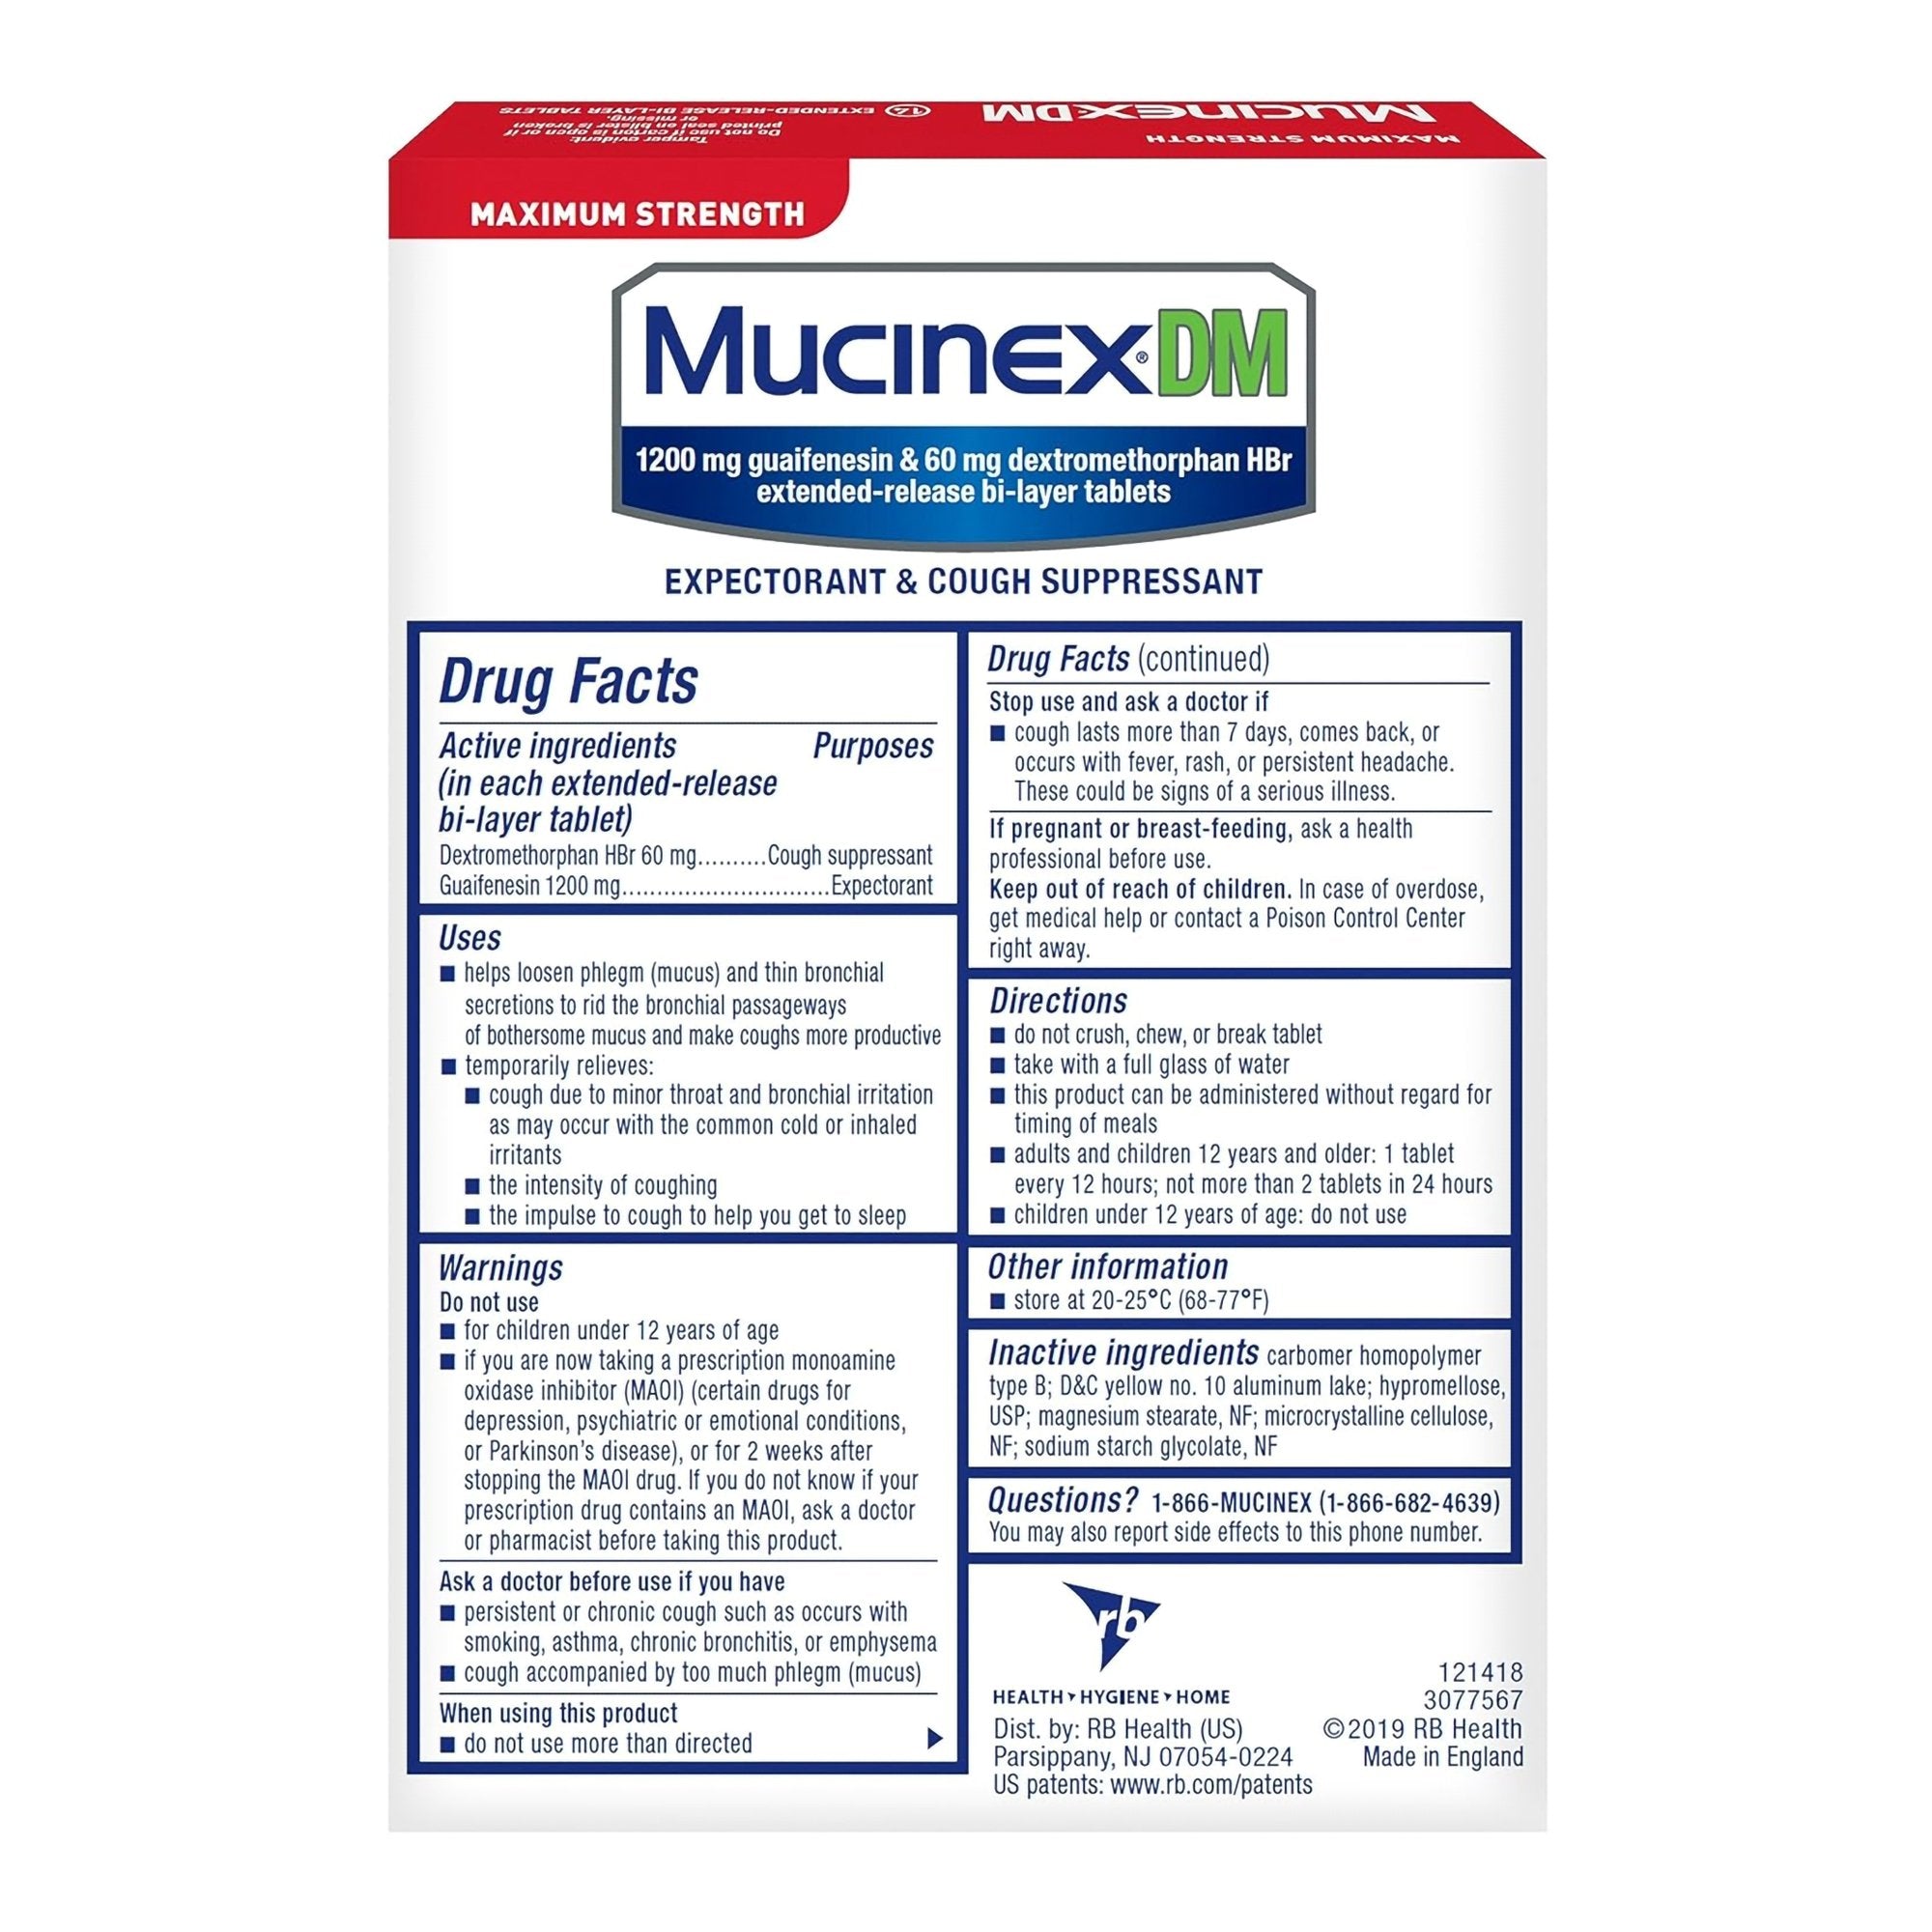 Cold and Cough Relief Mucinex® DM 1,200 mg - 60 mg Strength Tablet 14 per Box